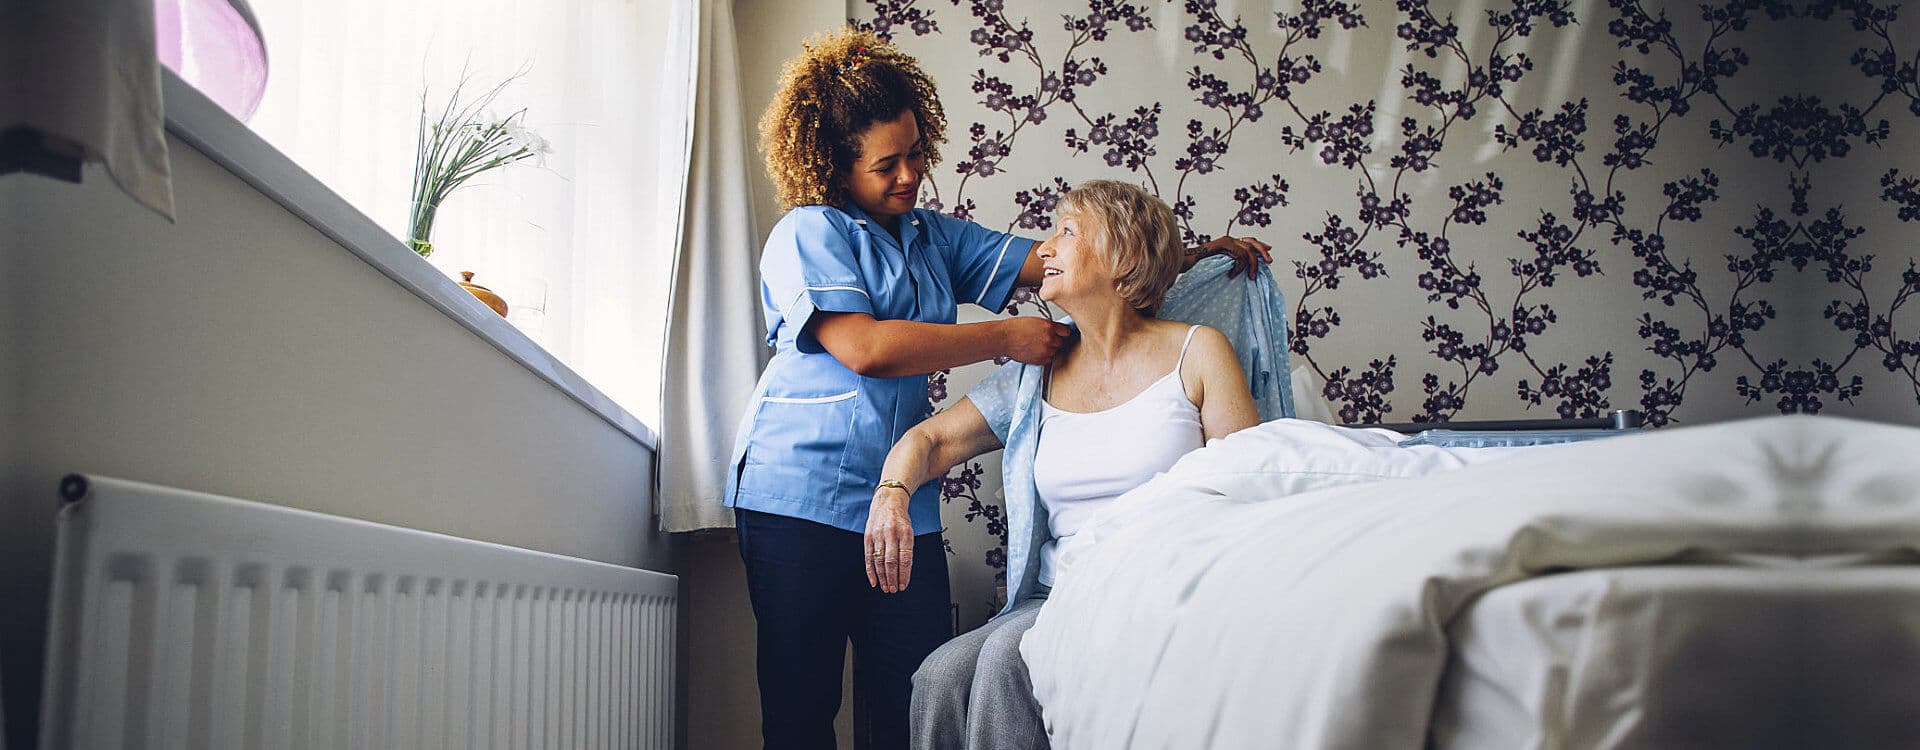 caregiver assisting patient in wearing her clothes